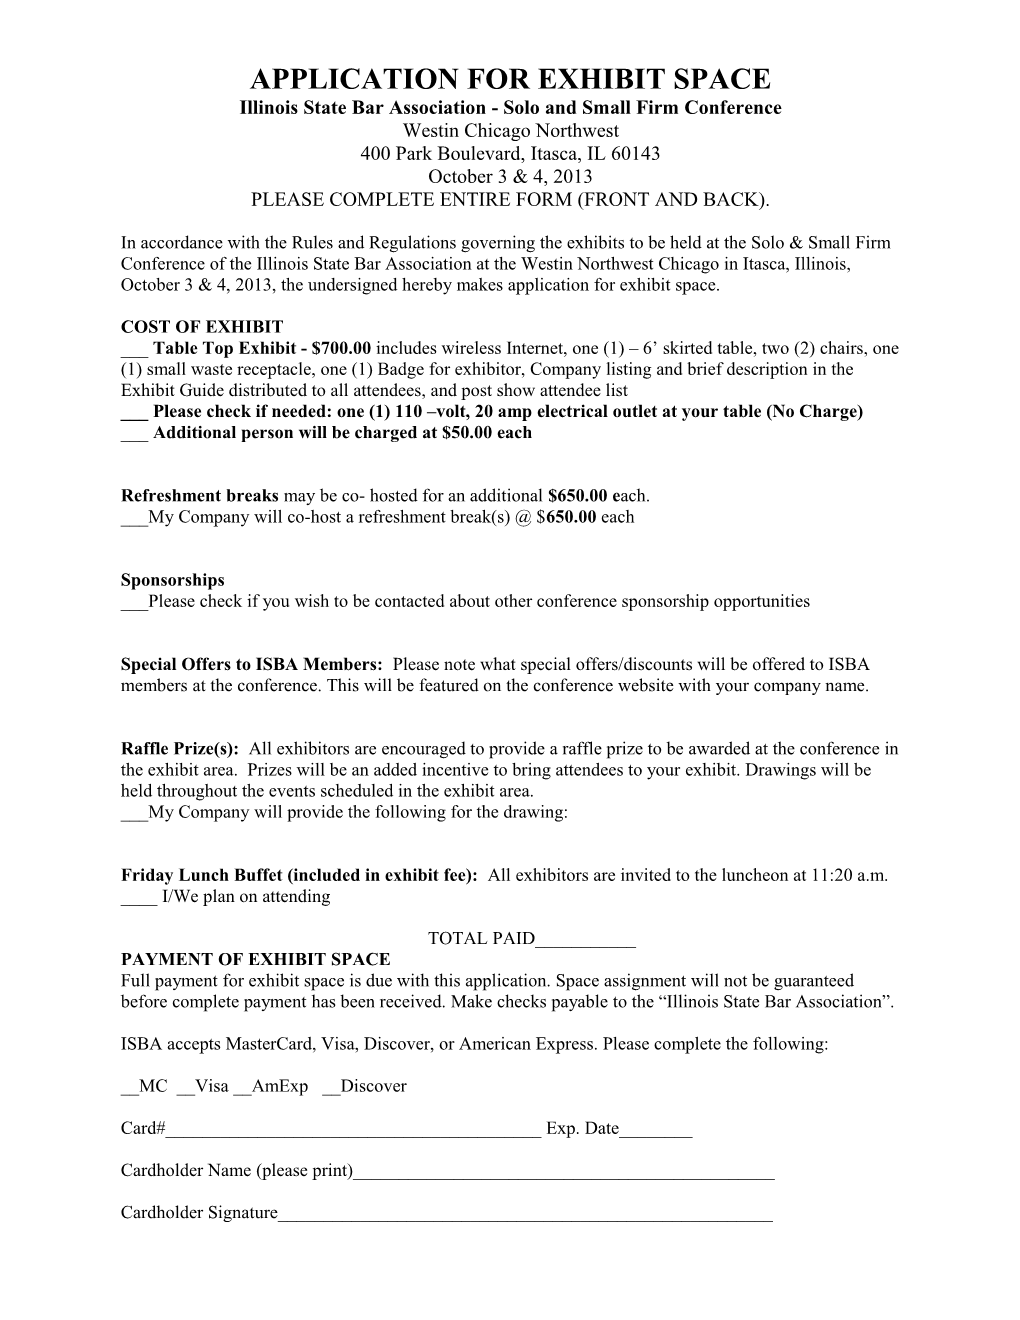 Application for Table-Top Exhibit Space